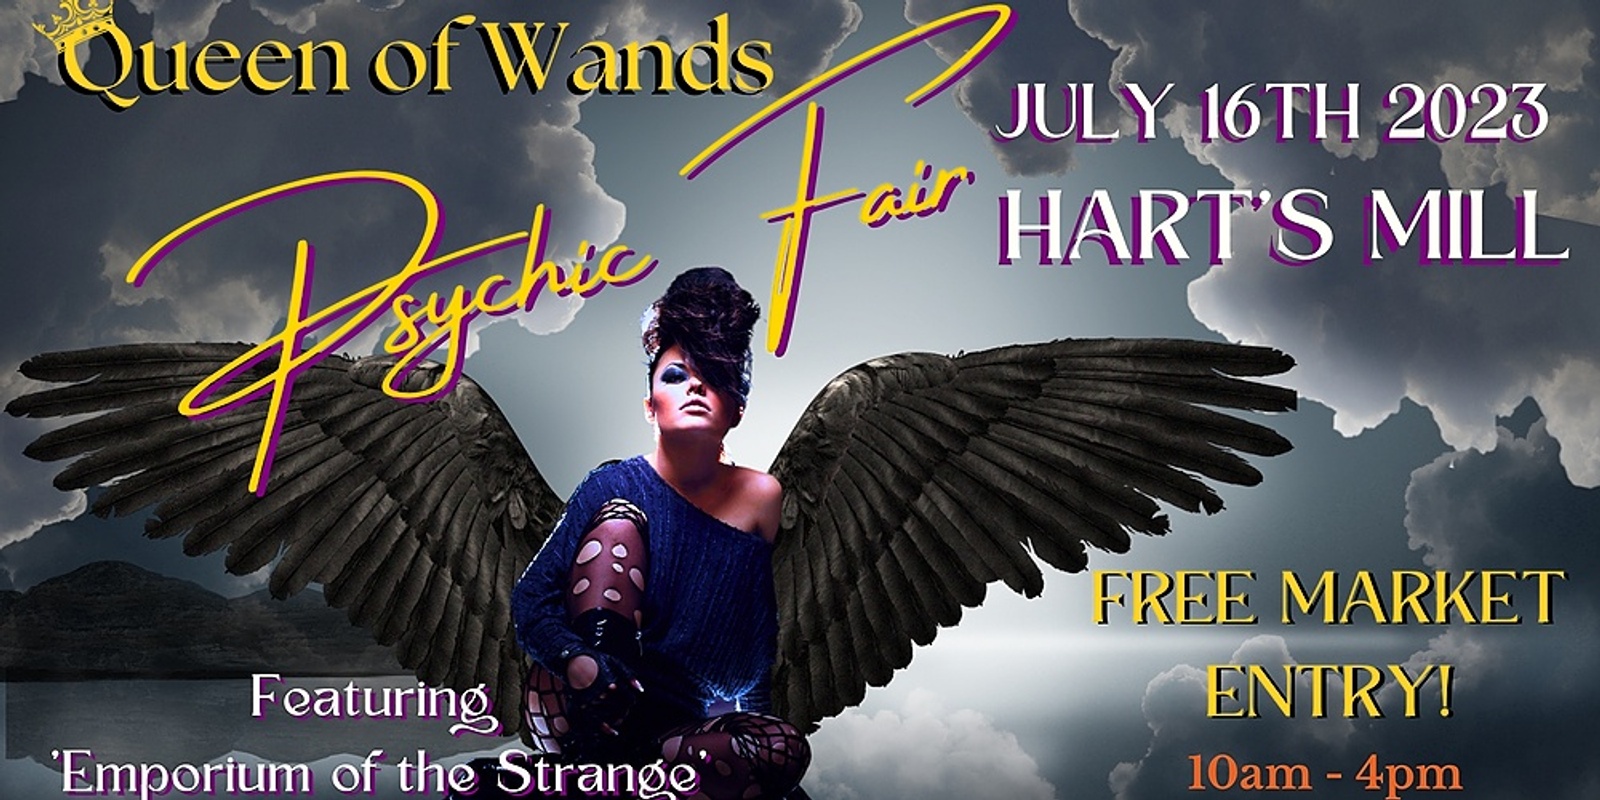 Banner image for Queen of Wands Psychic Fair - AT HART'S MILL! 